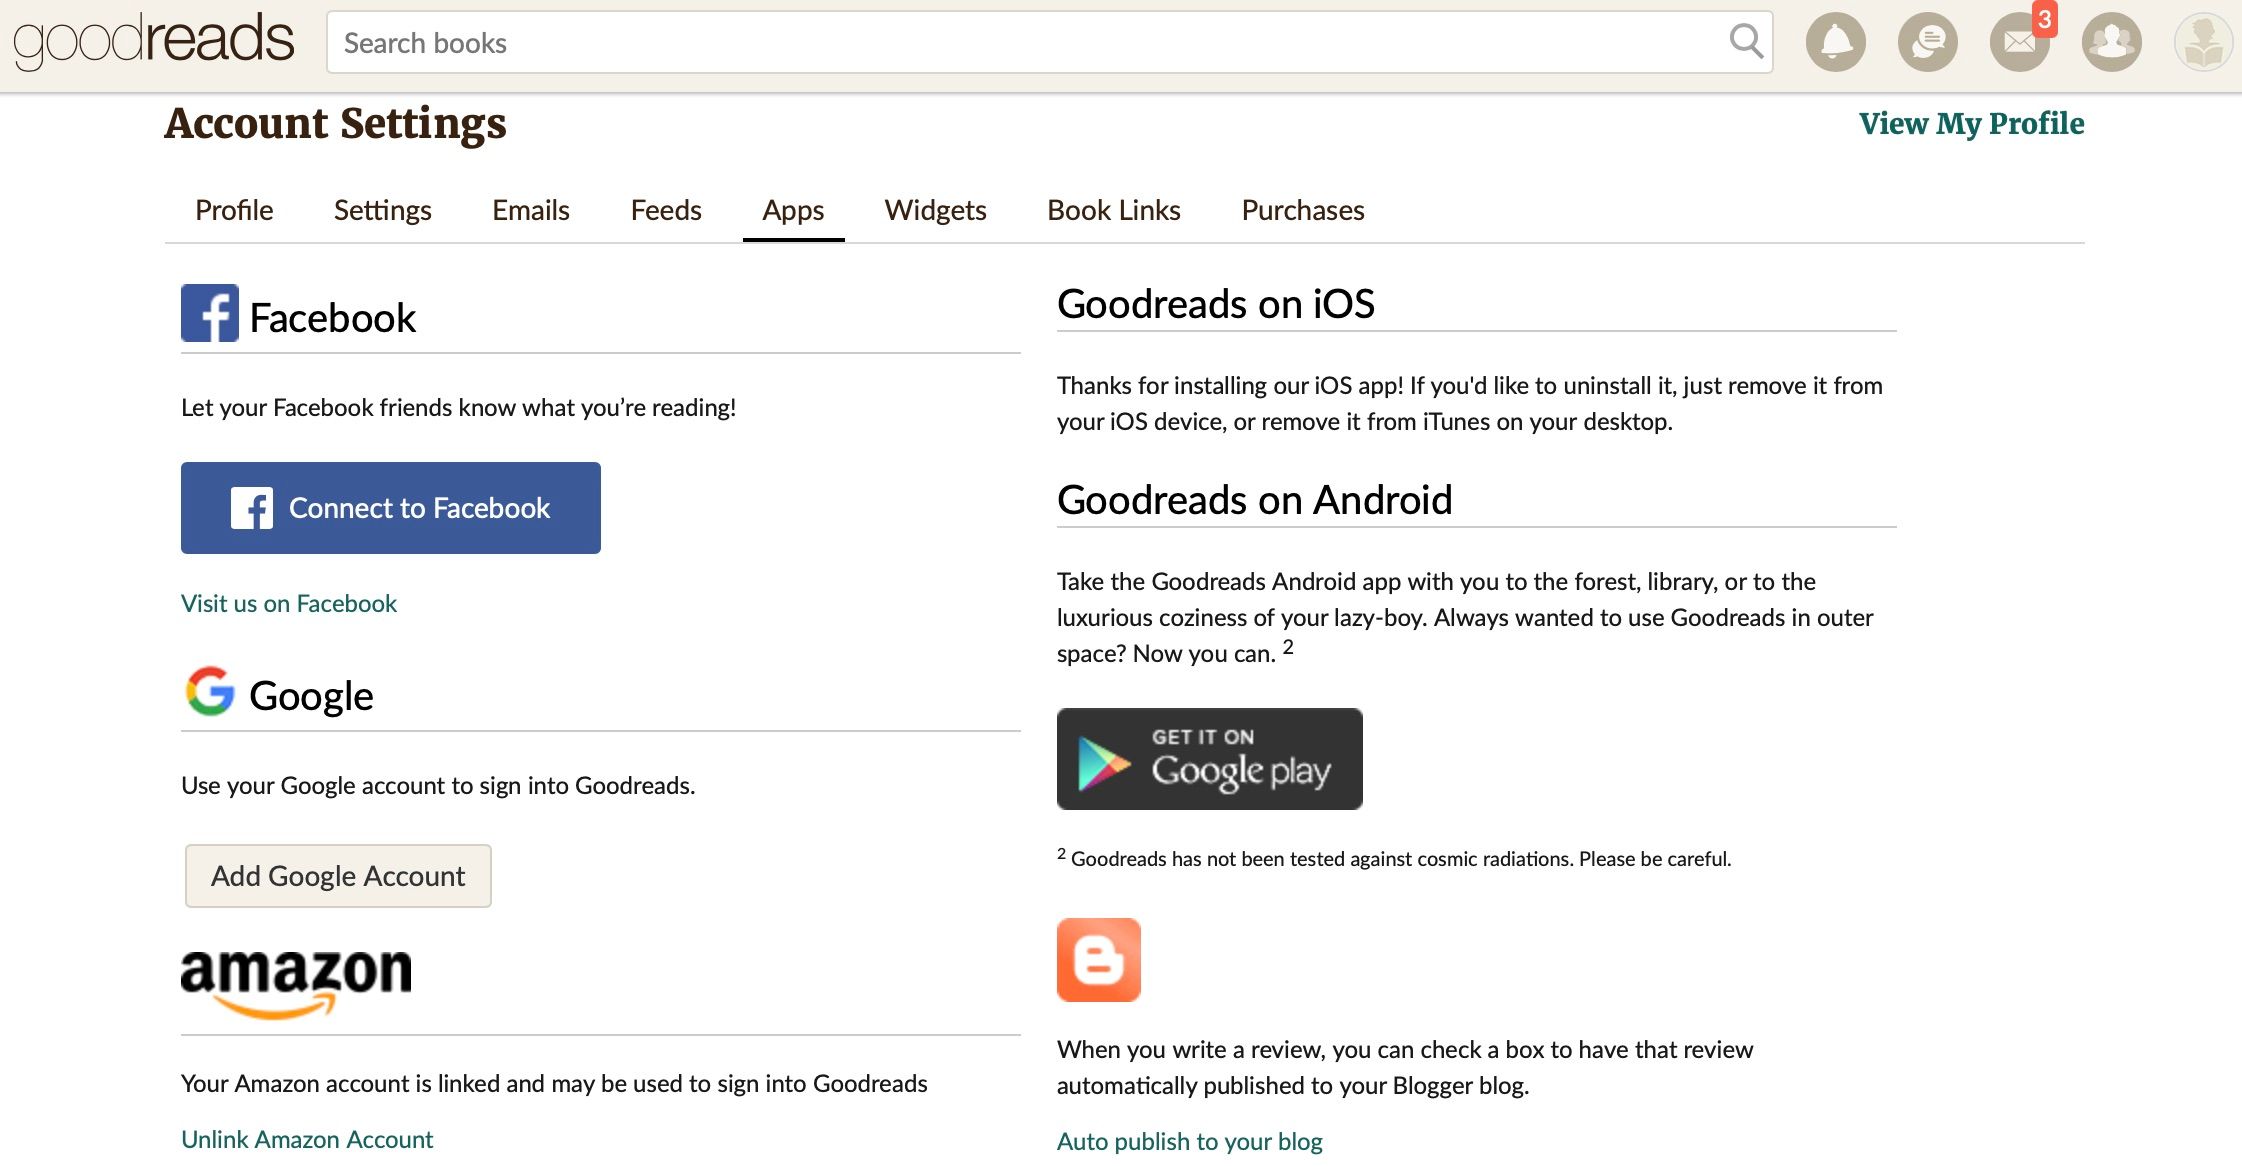 Screenshot of goodreads website showing apps section in account settings